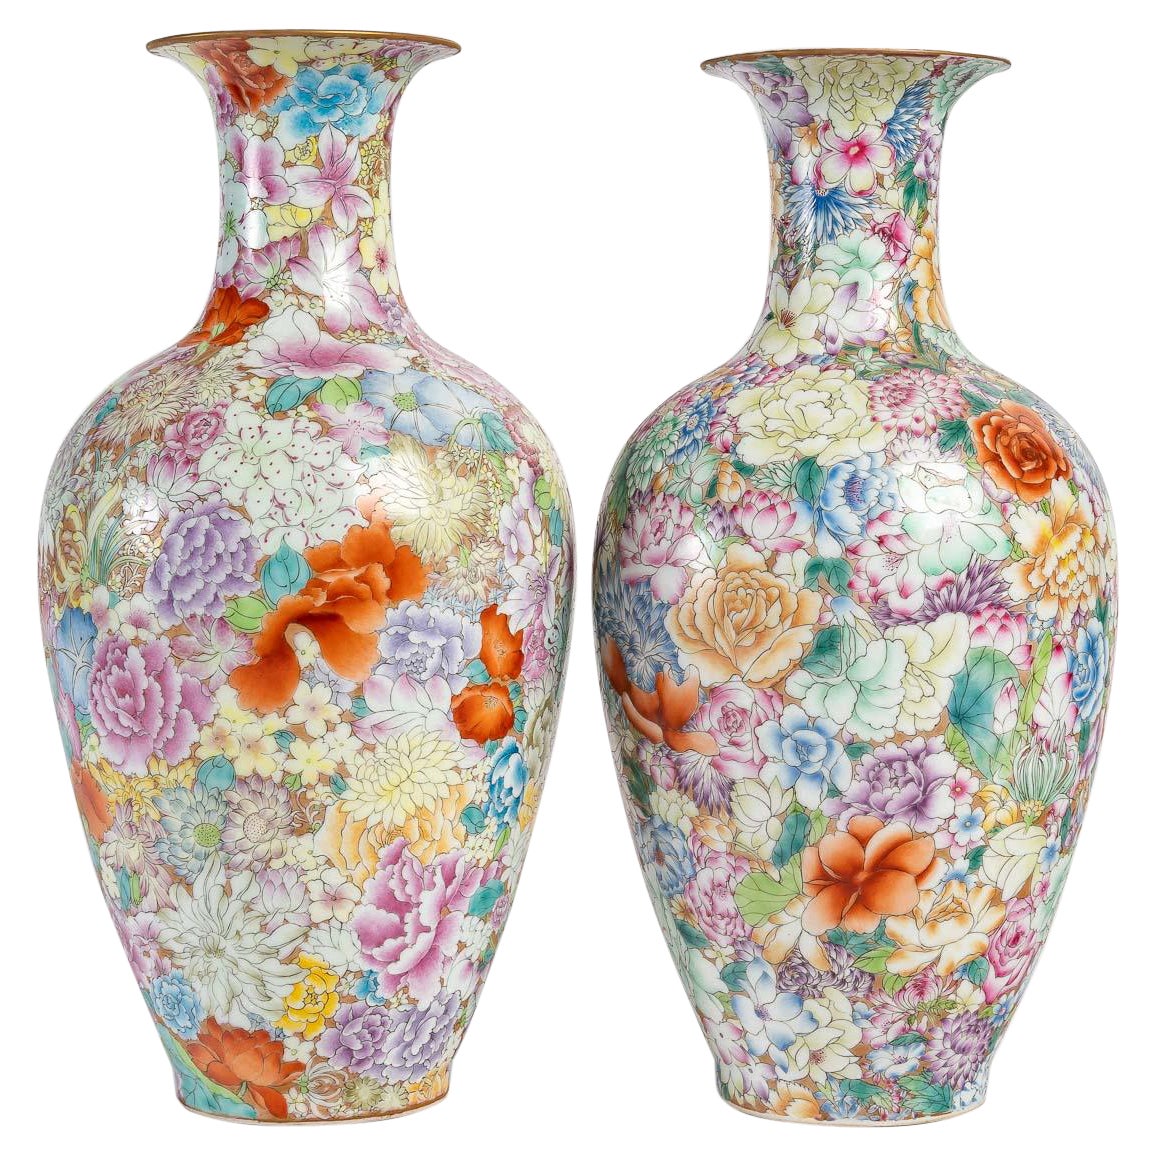 Pair of China Porcelain Vases with "Thousand Flowers" Design